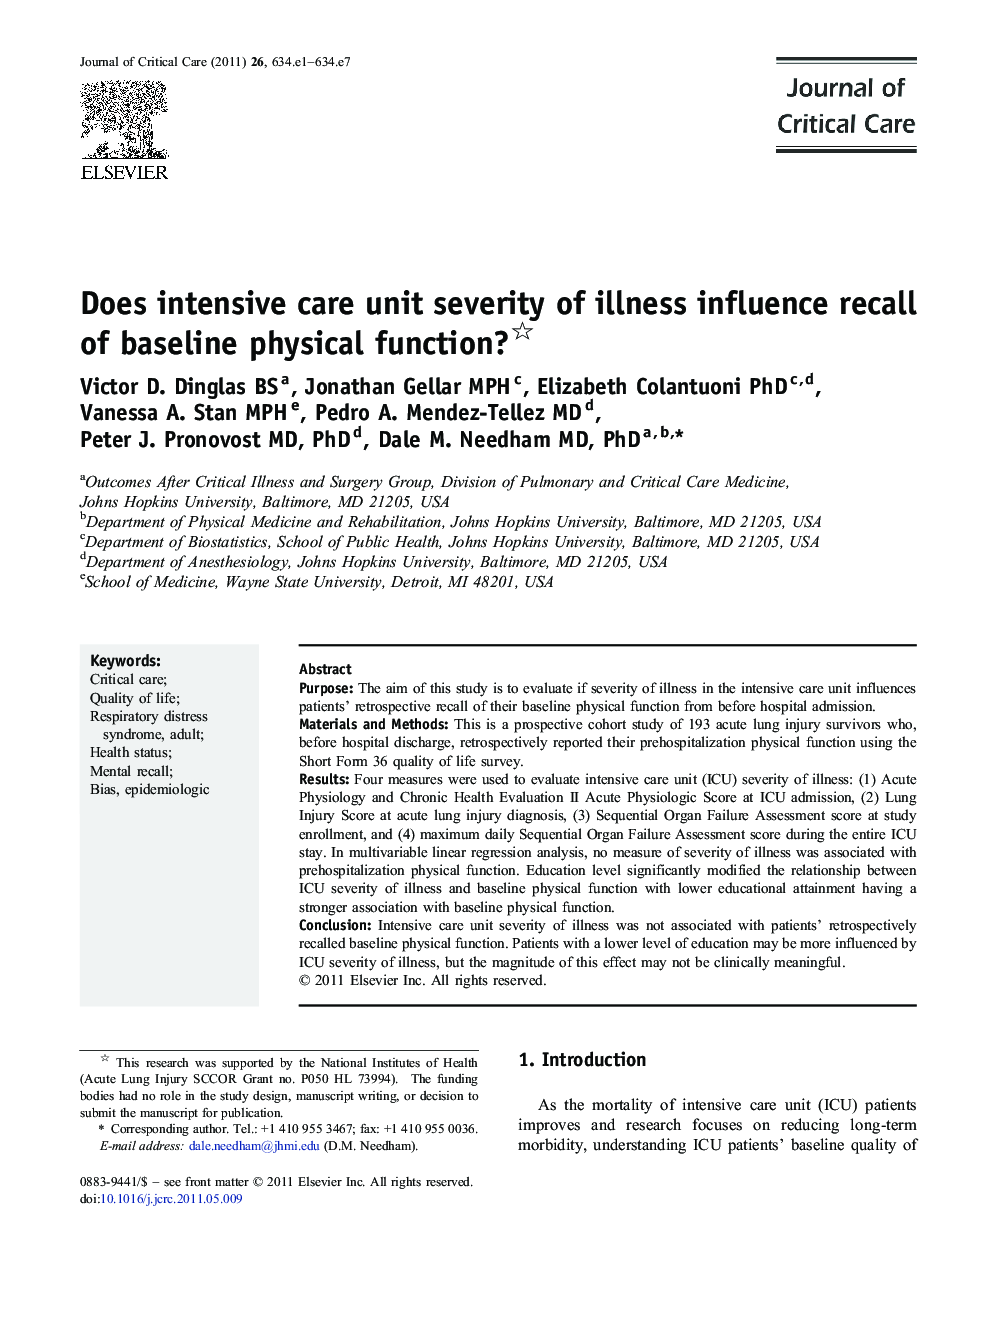 Does intensive care unit severity of illness influence recall of baseline physical function?